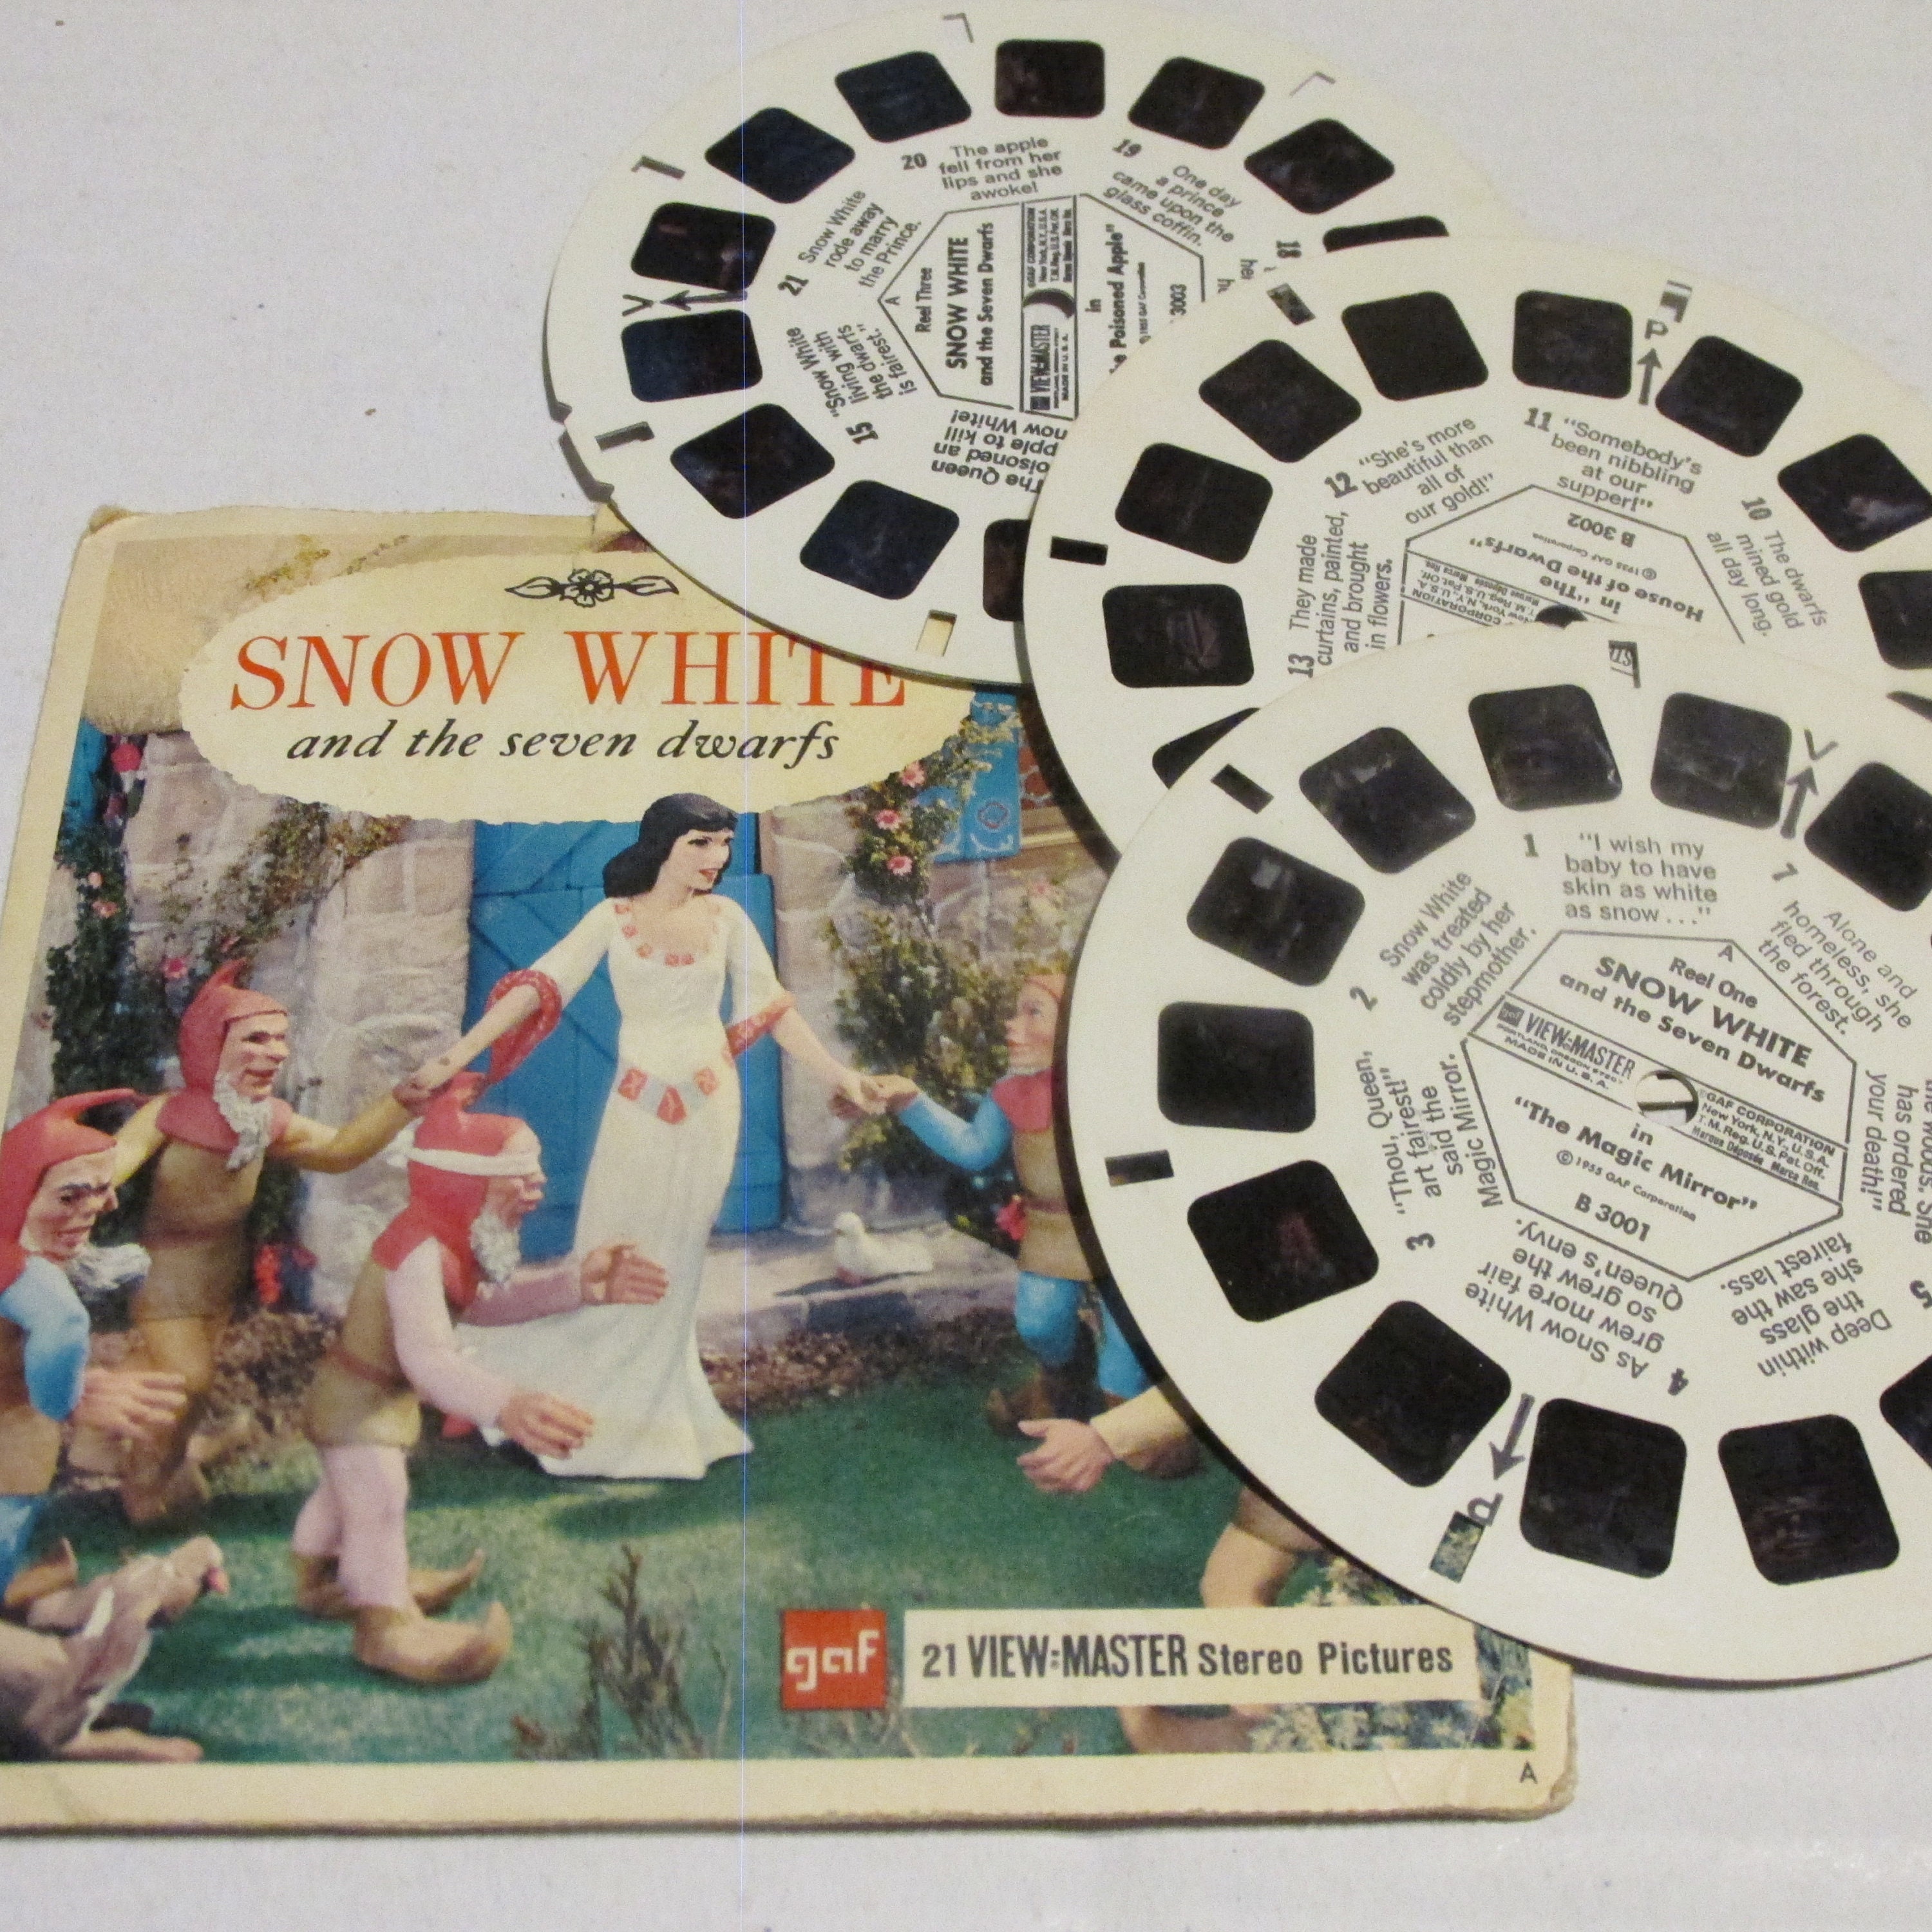 Disney Snow White and the Seven Dwarfs, 3 Reel Viewer Master Stereo  Pictures, 1955 